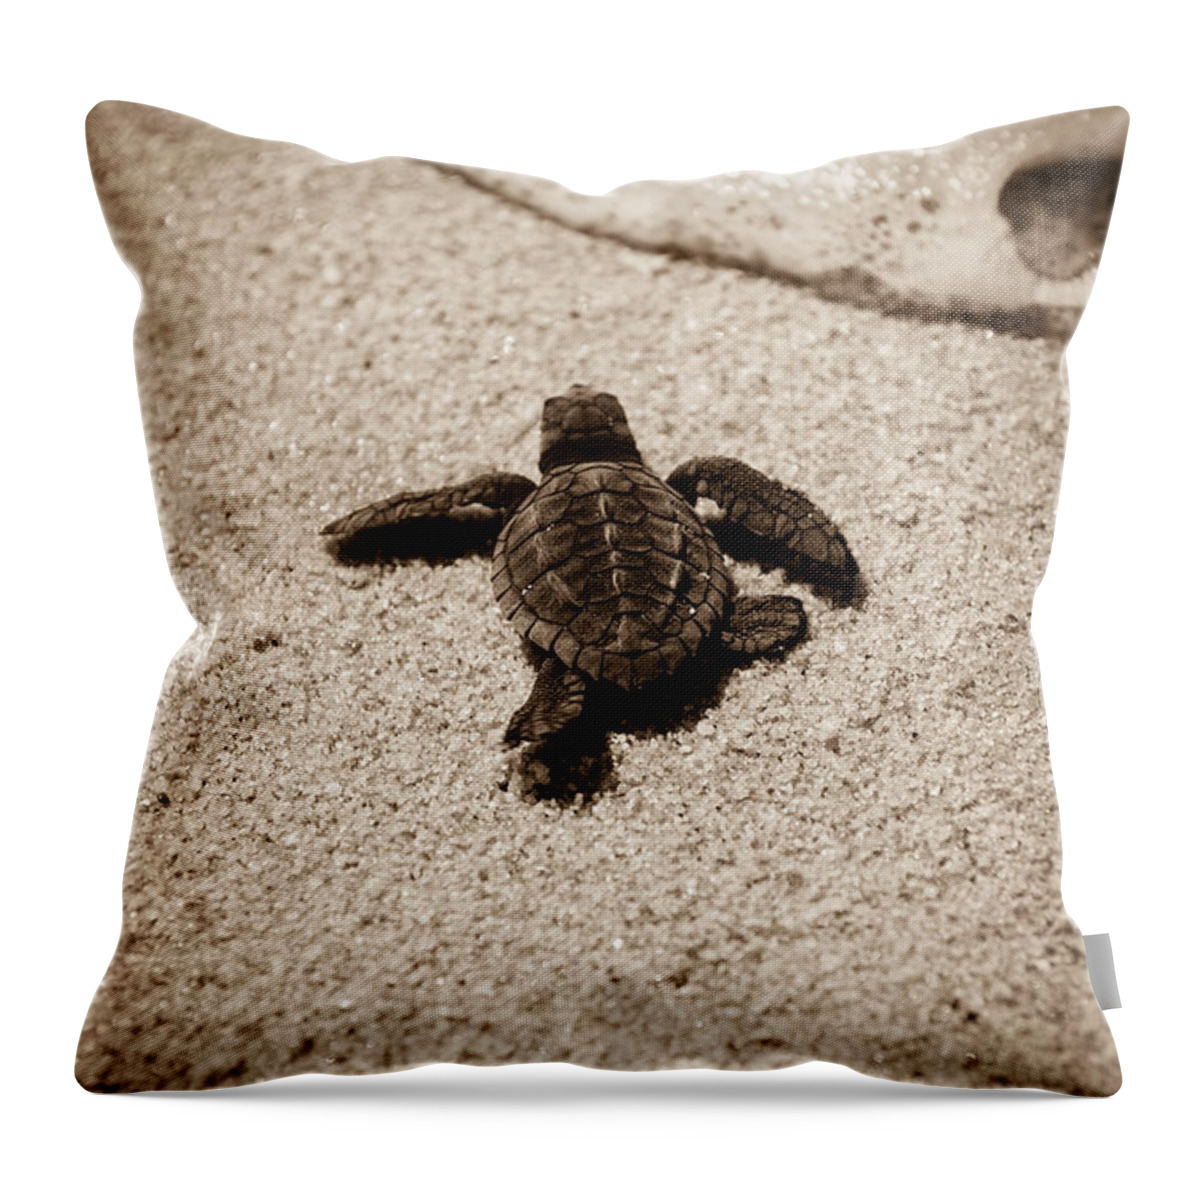 Baby Loggerhead Throw Pillow featuring the photograph Baby Sea Turtle by Sebastian Musial